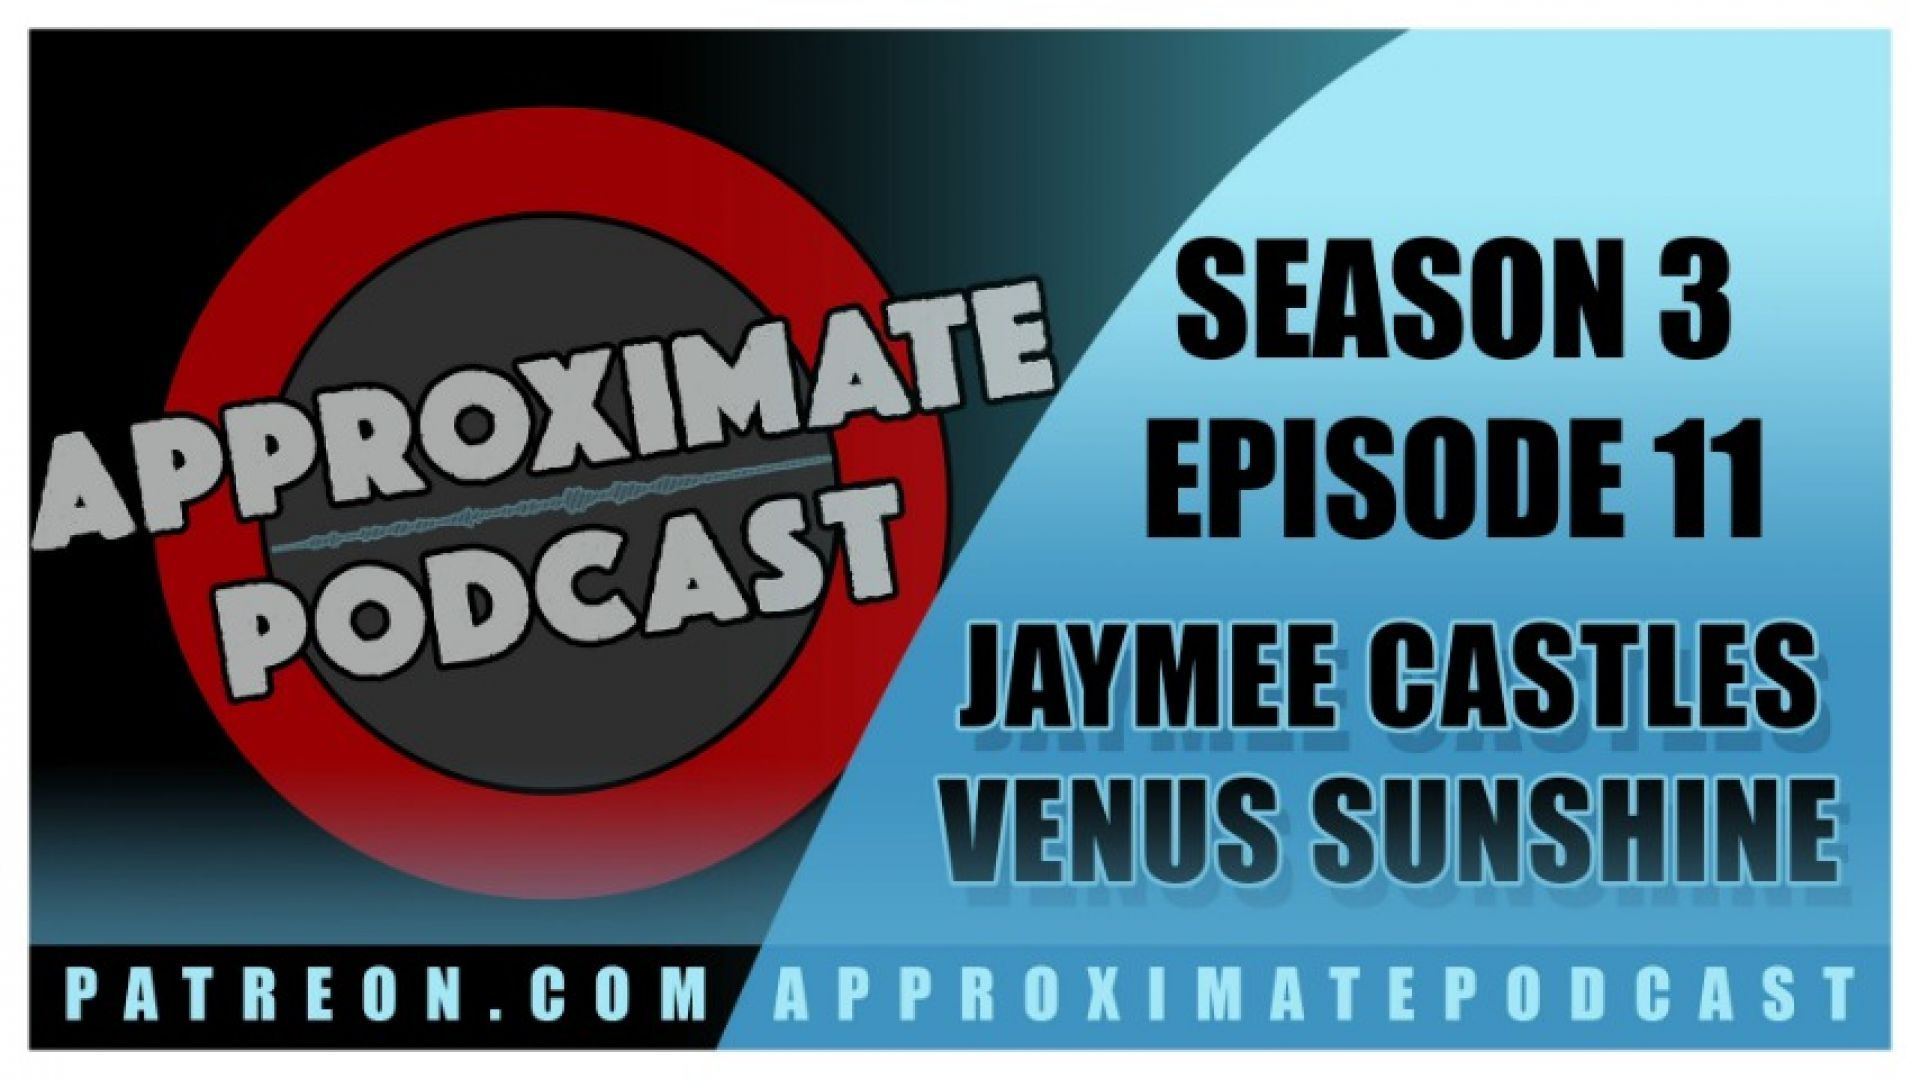 Approximate Podcast Season 3 Episode 056 Jaymee Castles